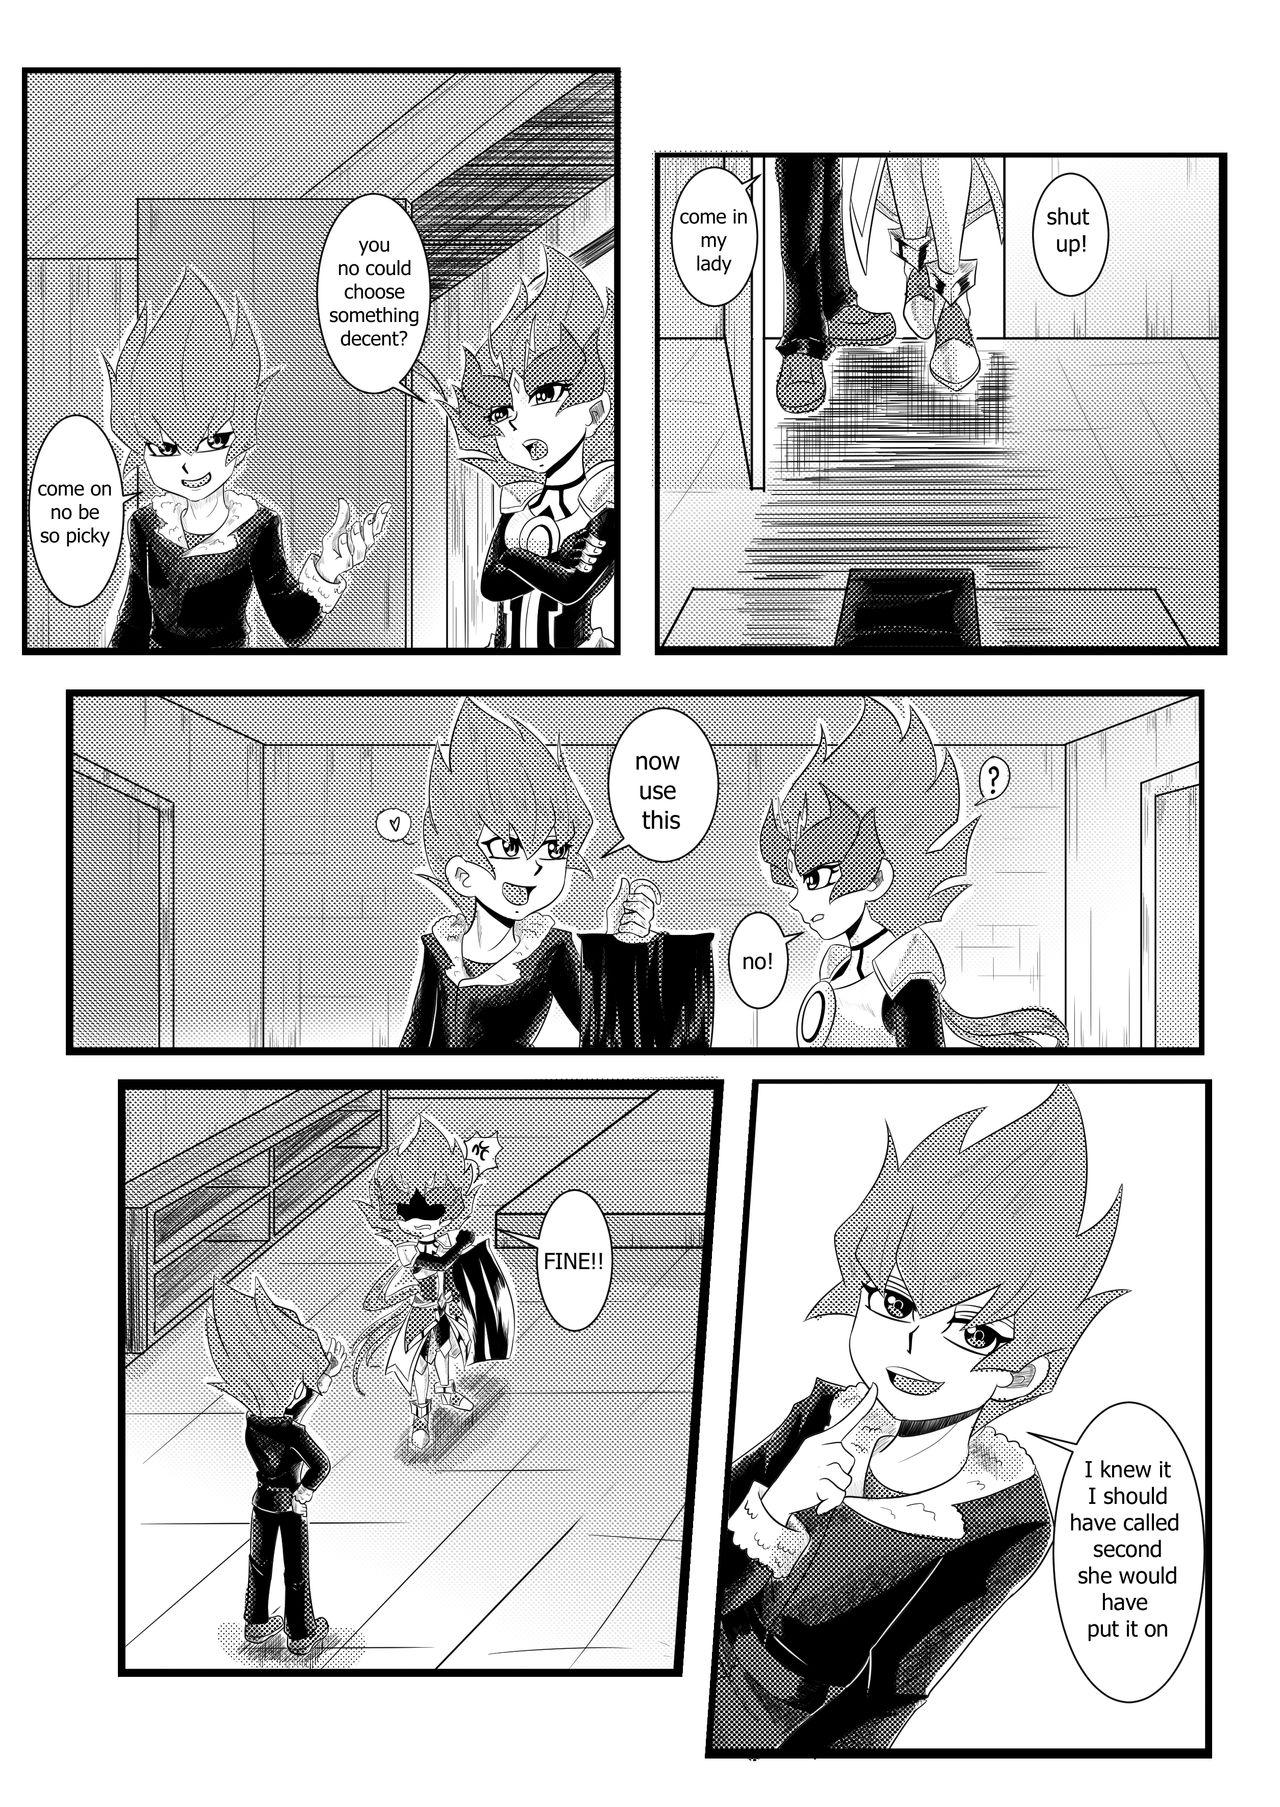 Chile For Her - Yu-gi-oh zexal Stepfamily - Page 10